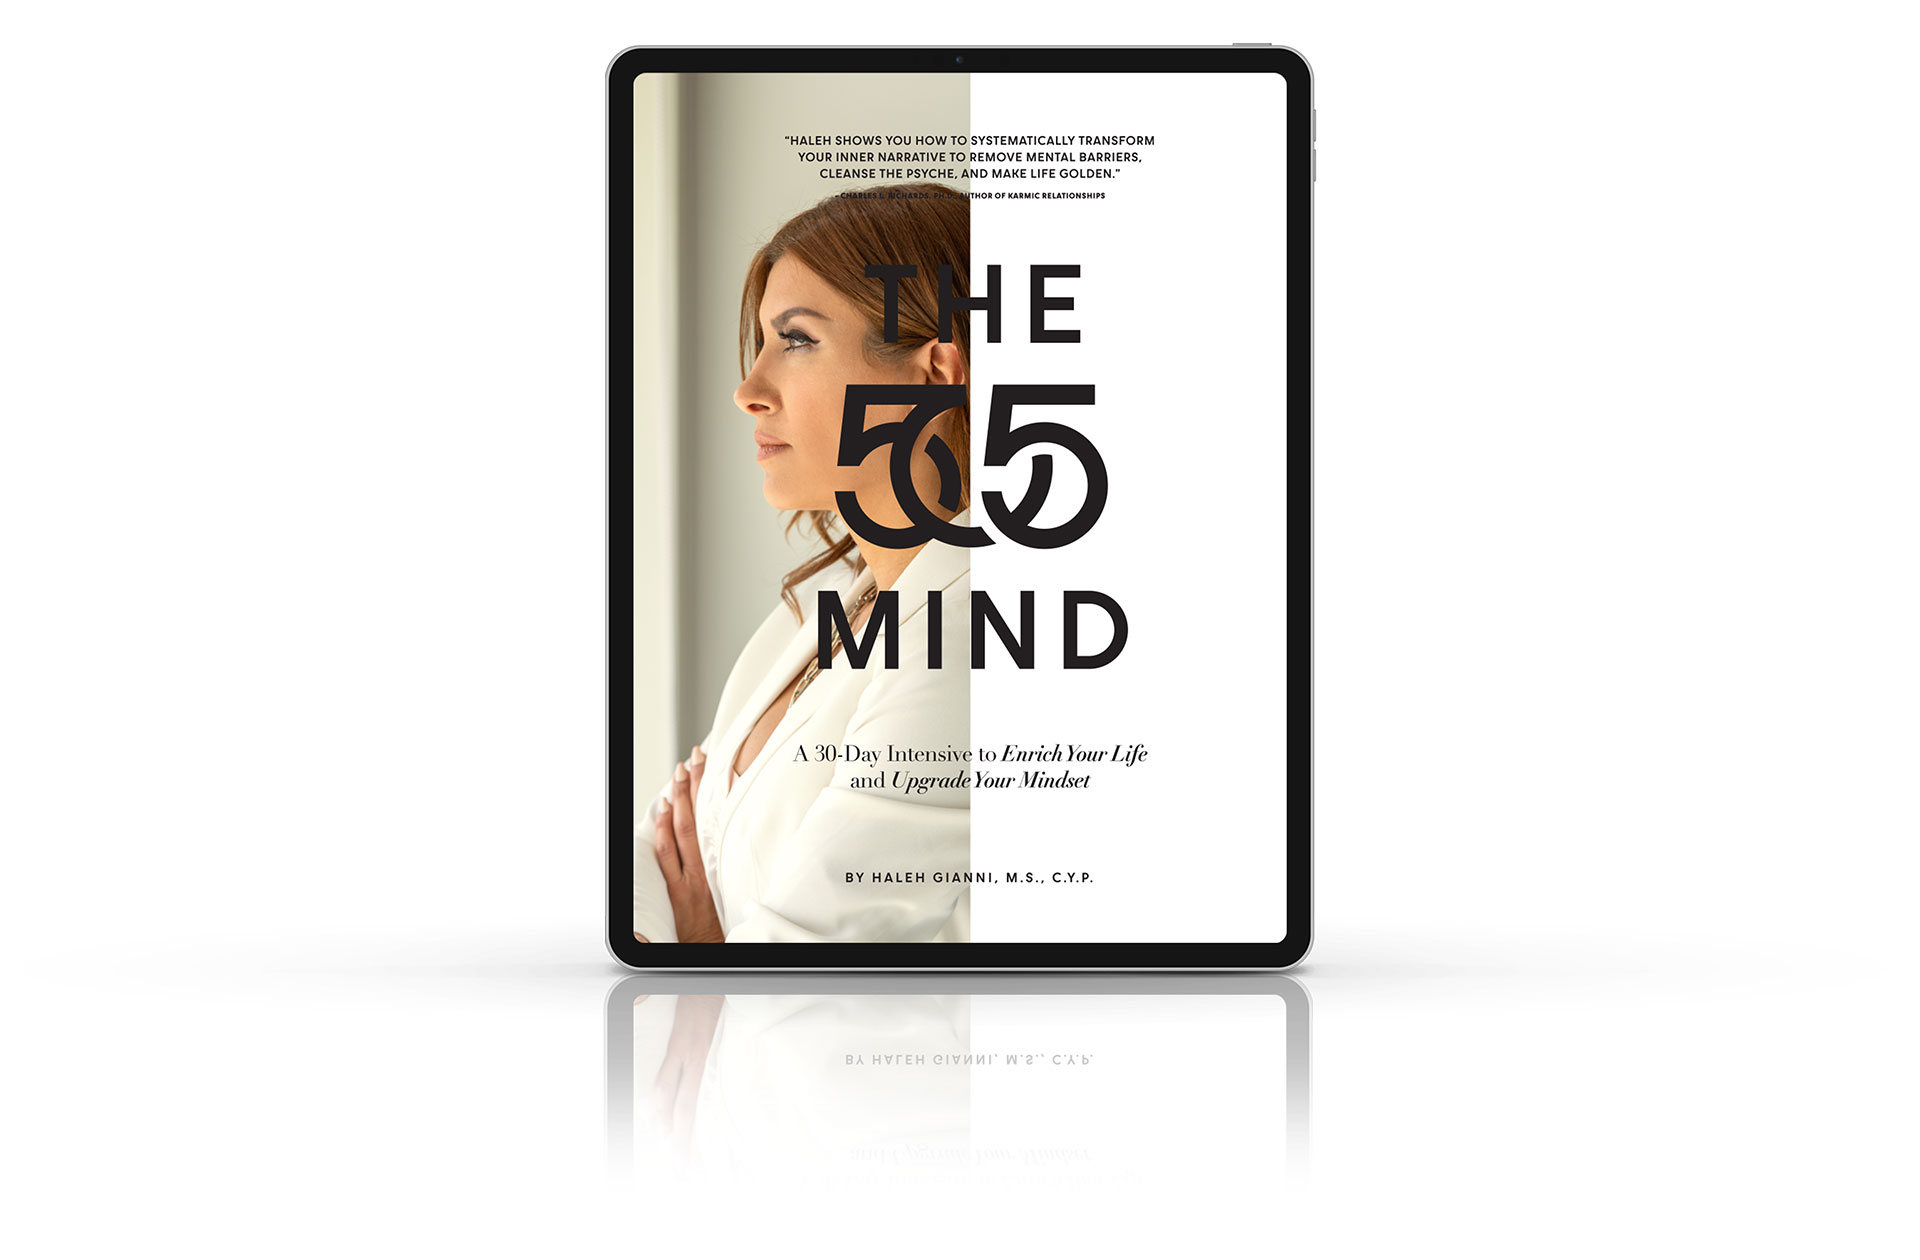 The 505 Mind eBook | 30 Day Intensive Guide to Enrich Your Life and Upgrade Your Mindset